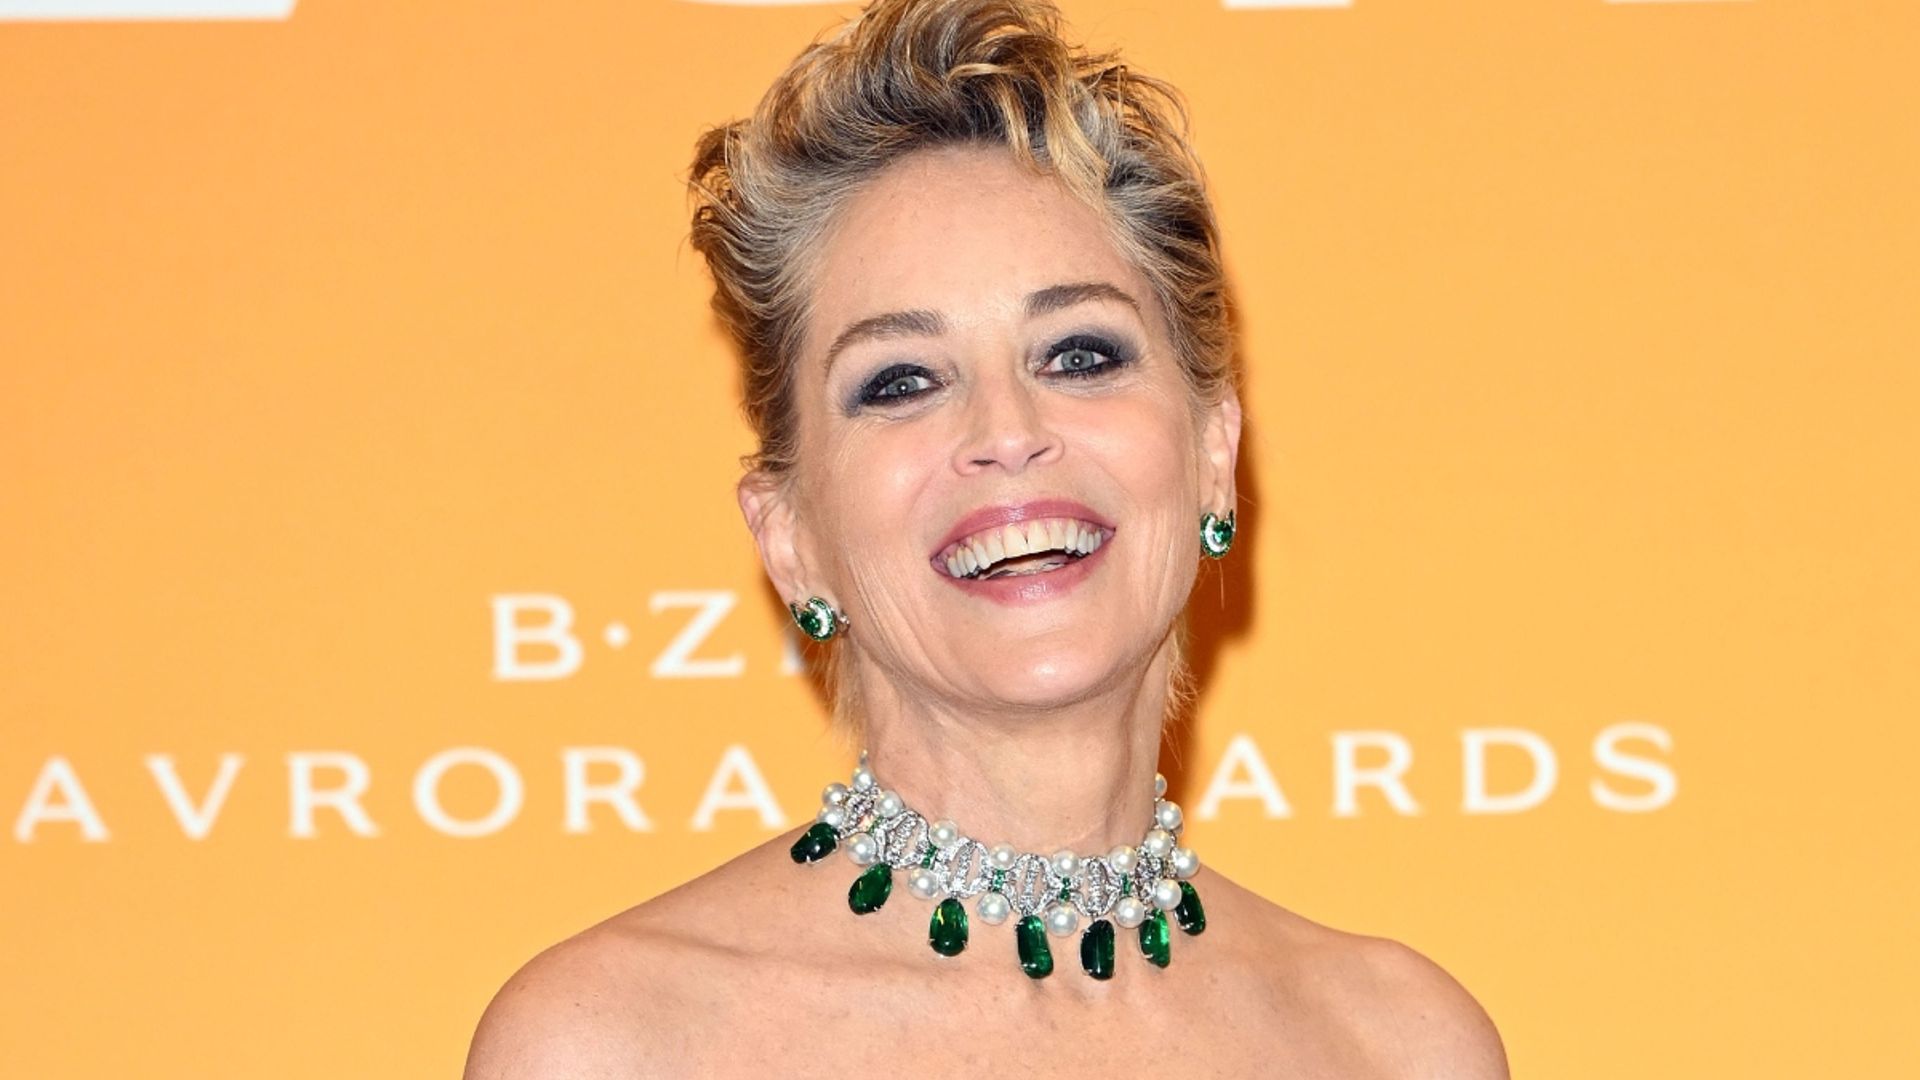 Sharon Stone 63 Shows Off Her Iconic Curves In Slinky Black Gown Hello